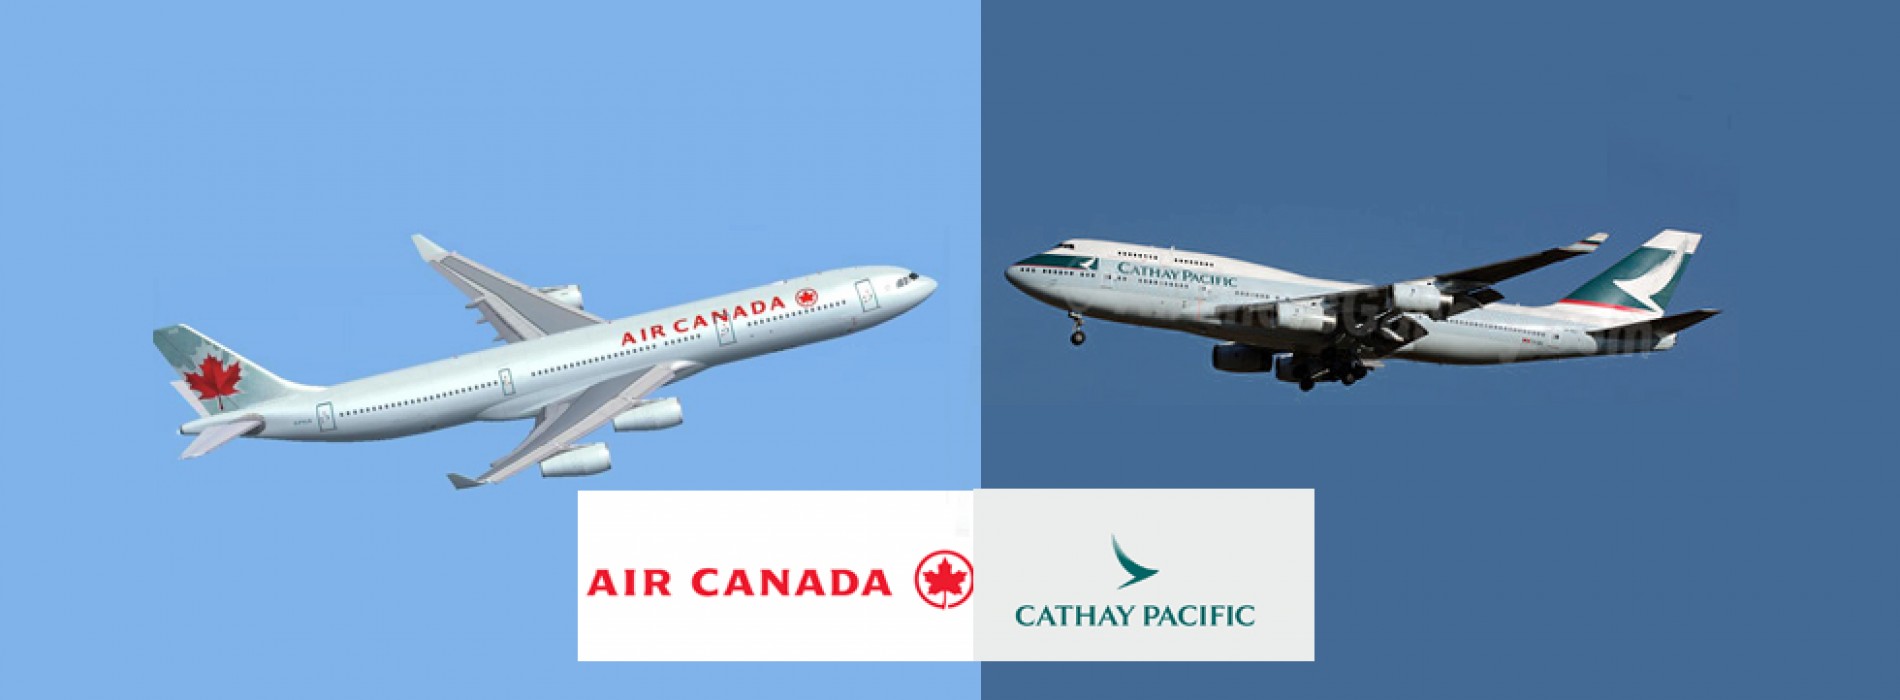 Cathay Pacific and Air Canada to introduce codeshare services